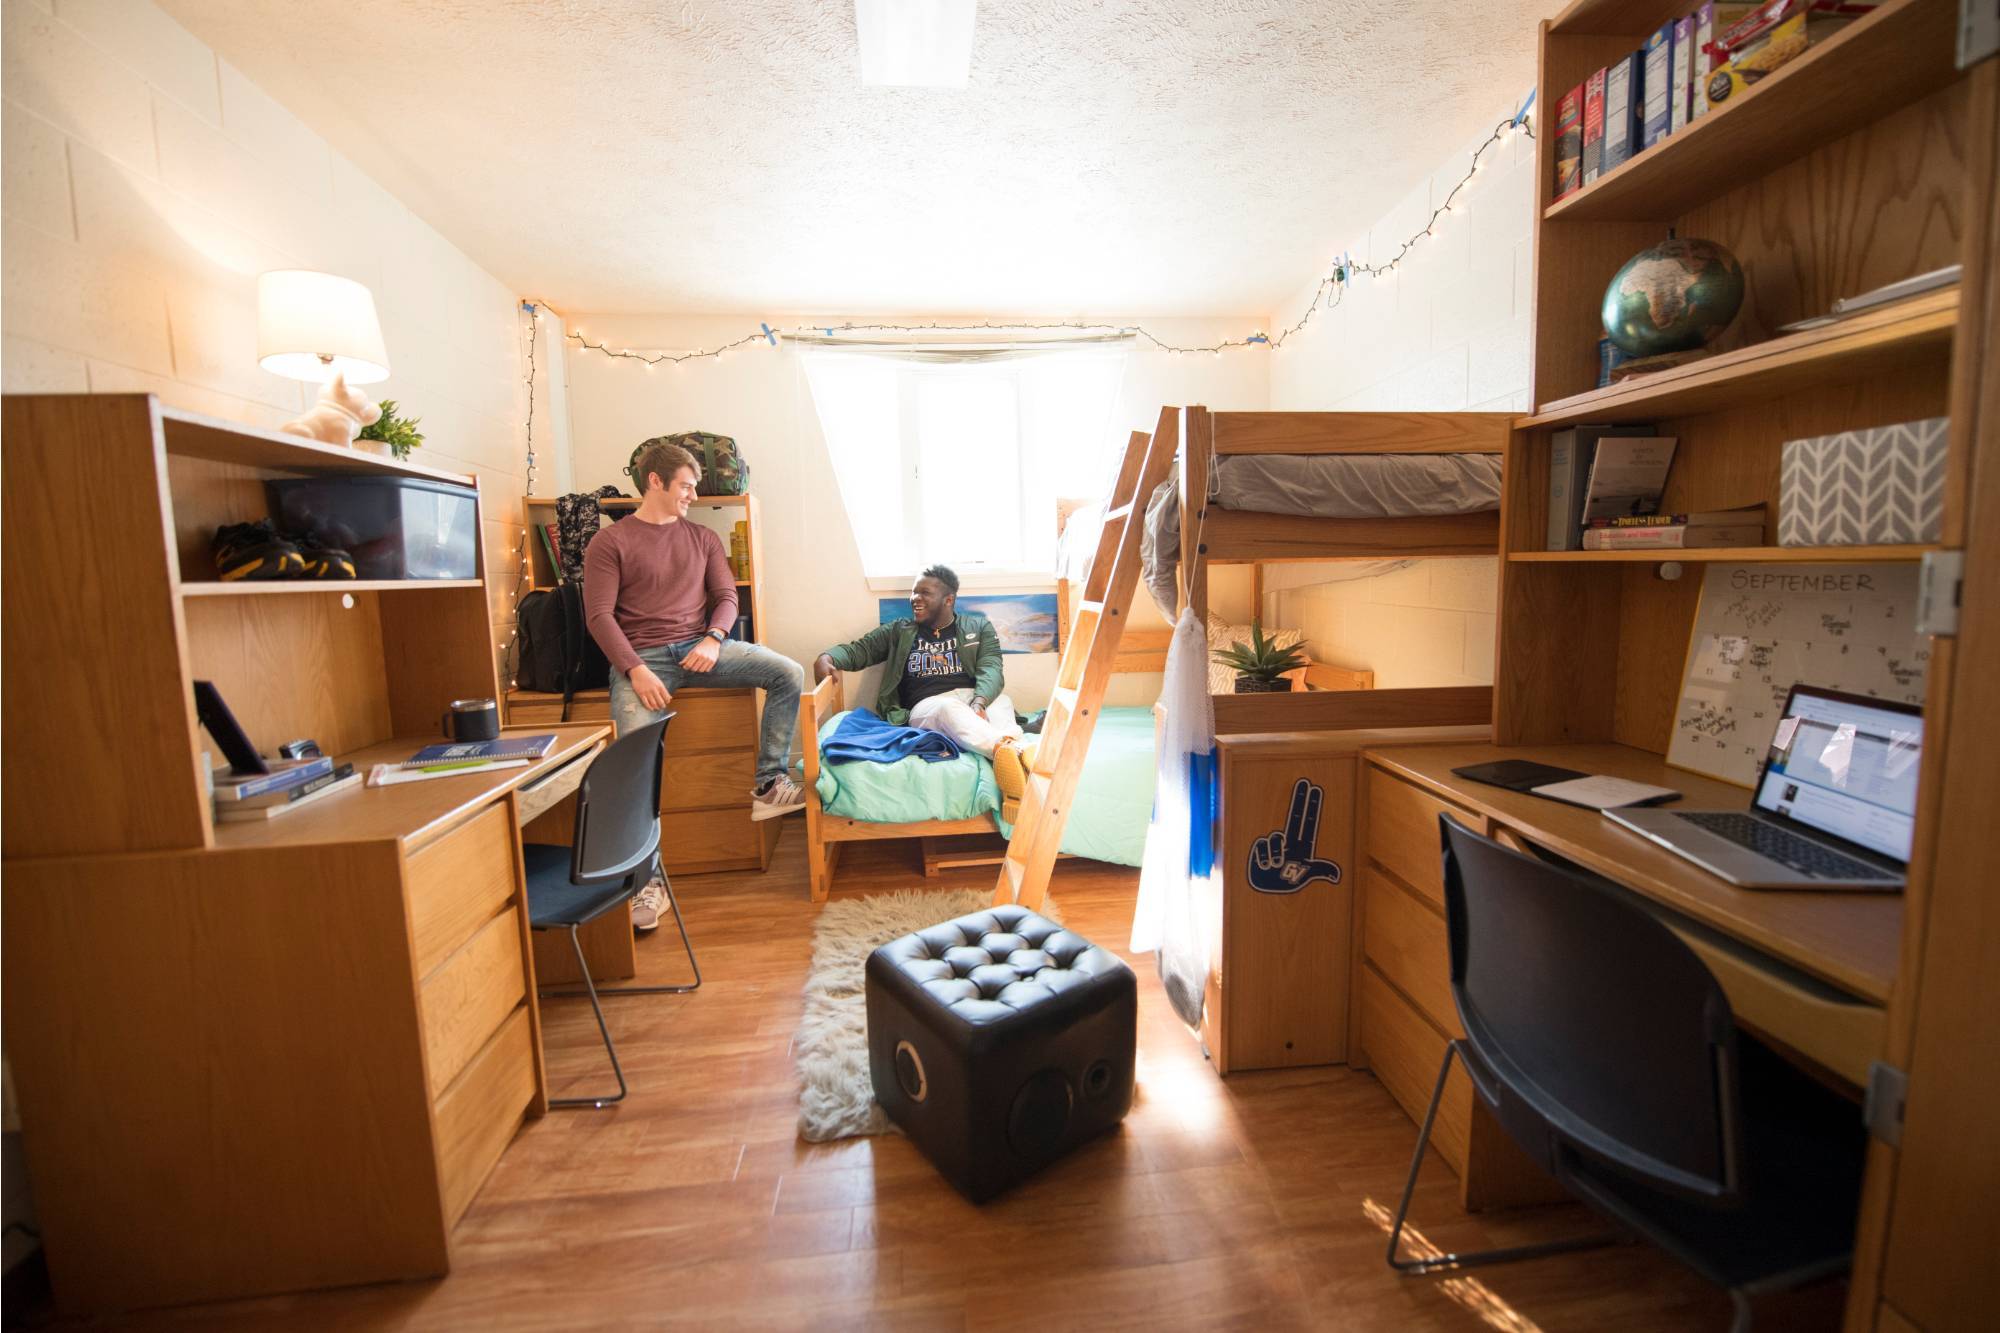 GVSU traditional-style student residents talking in their room.